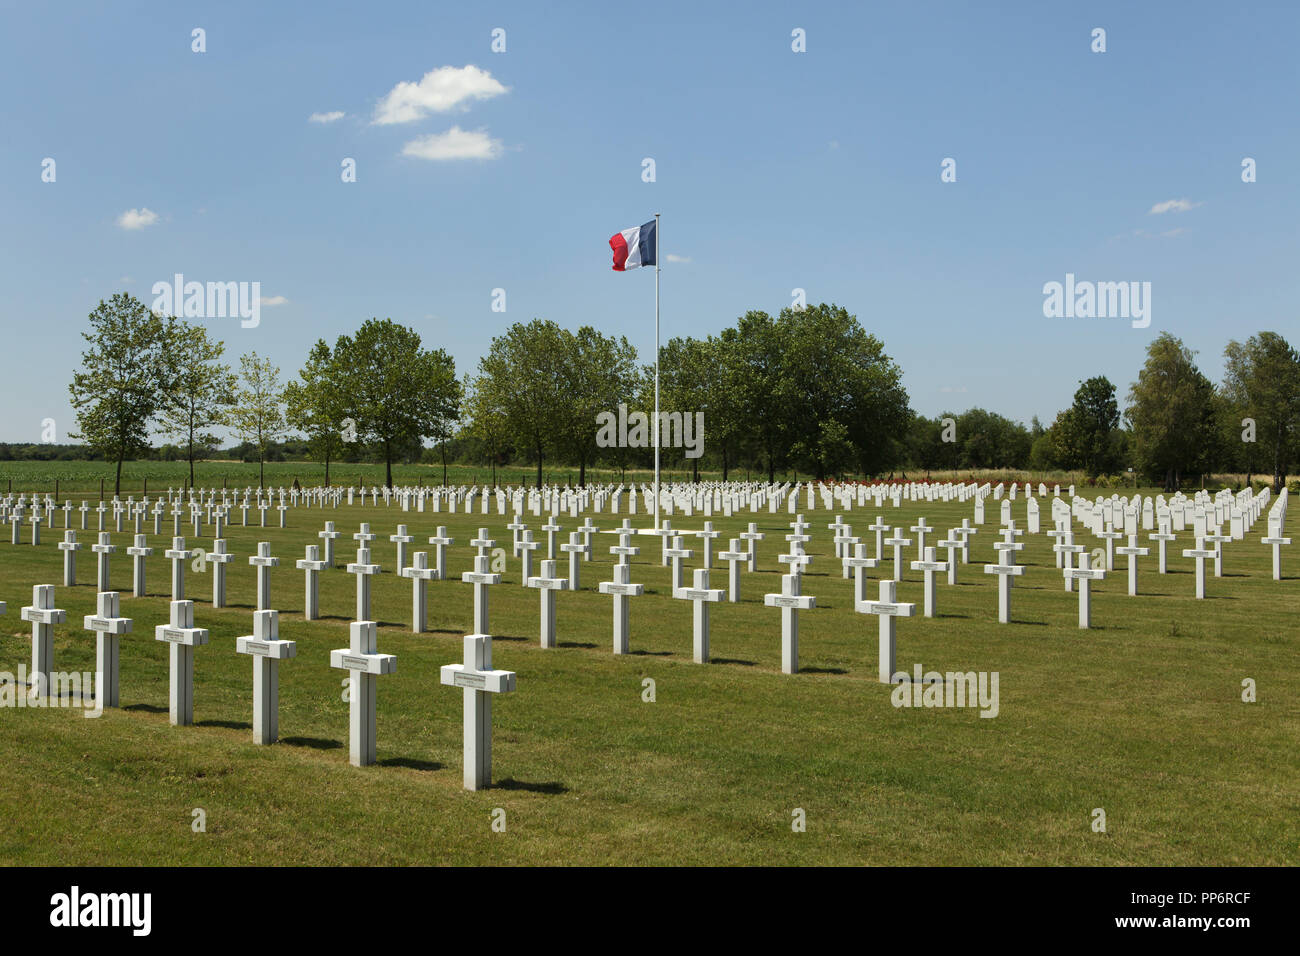 Graves of French soldiers fallen during World War II at the Suippes National Cemetery (Nécropole nationale de la Ferme de Suippes) near Suippes in Marne region in north-eastern France. Over 1,900 French soldiers fallen in June 1940 during World War II are buried at the cemetery. Stock Photo